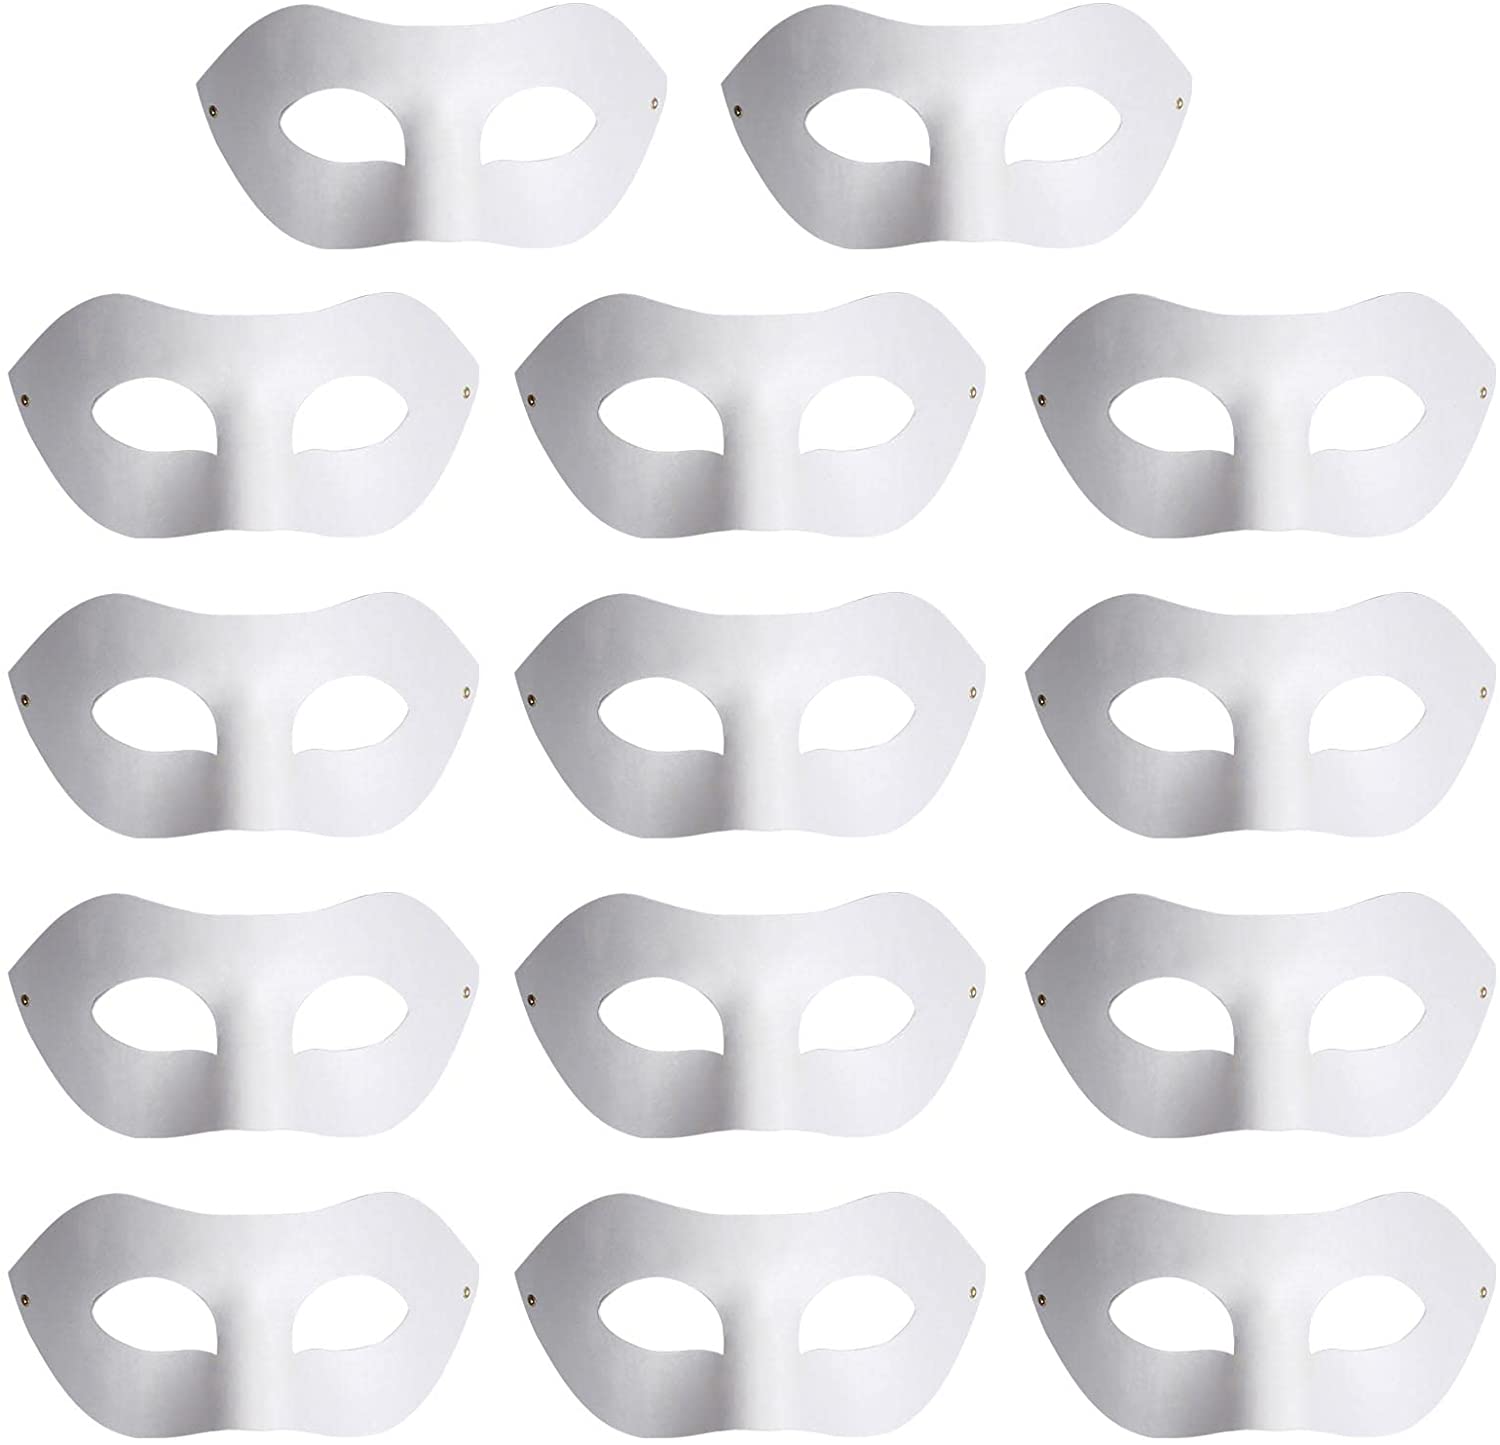 LMC Products Paper Masks 24 Count - Customizable, DIY Masks for Crafts, Costumes, Parties, Holidays